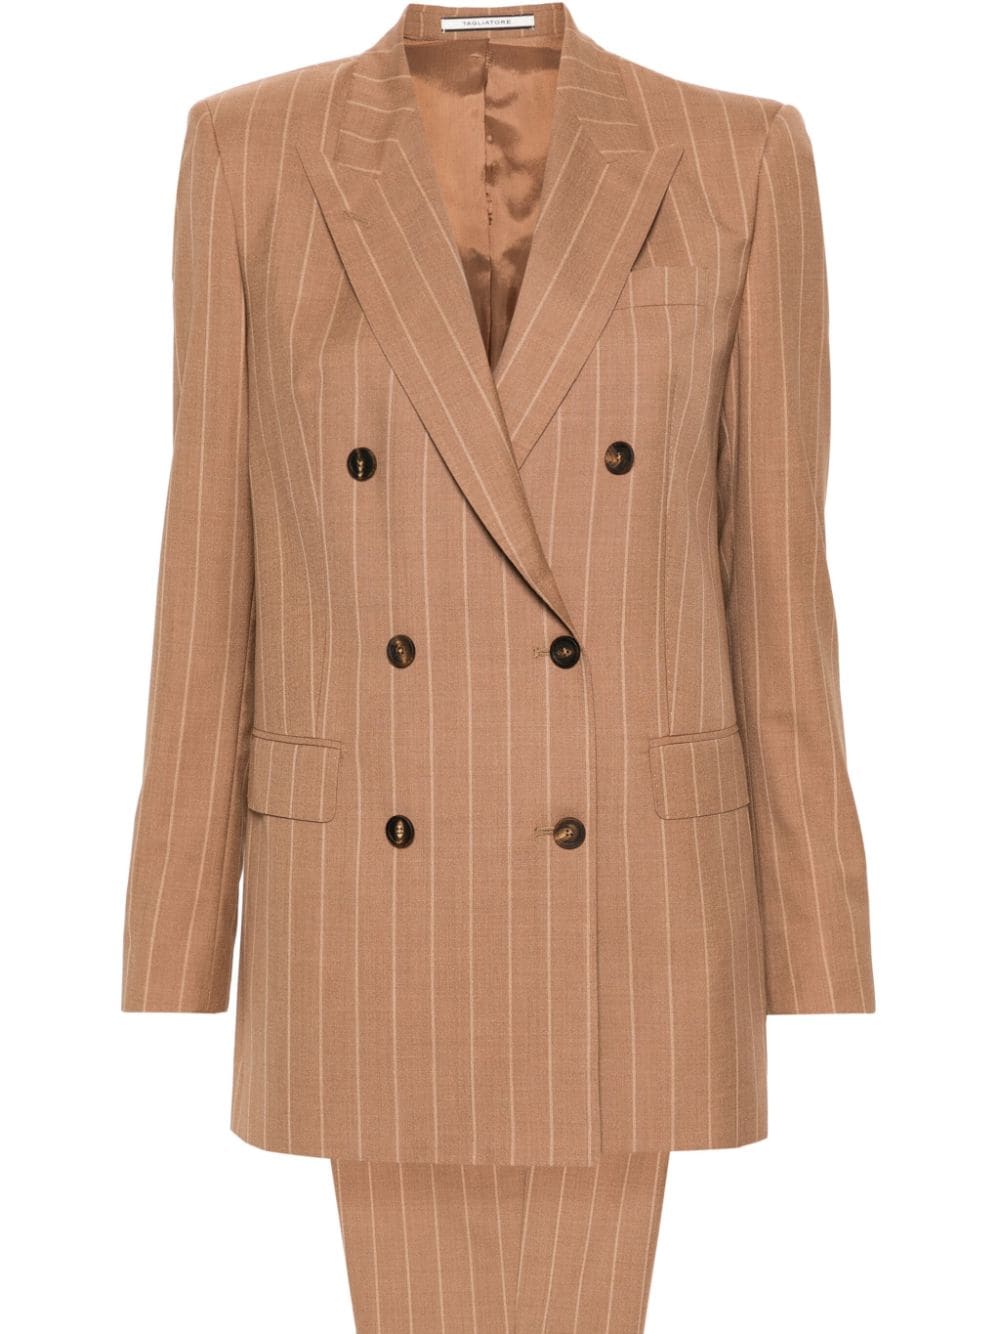 Jasmine striped double-breasted suit